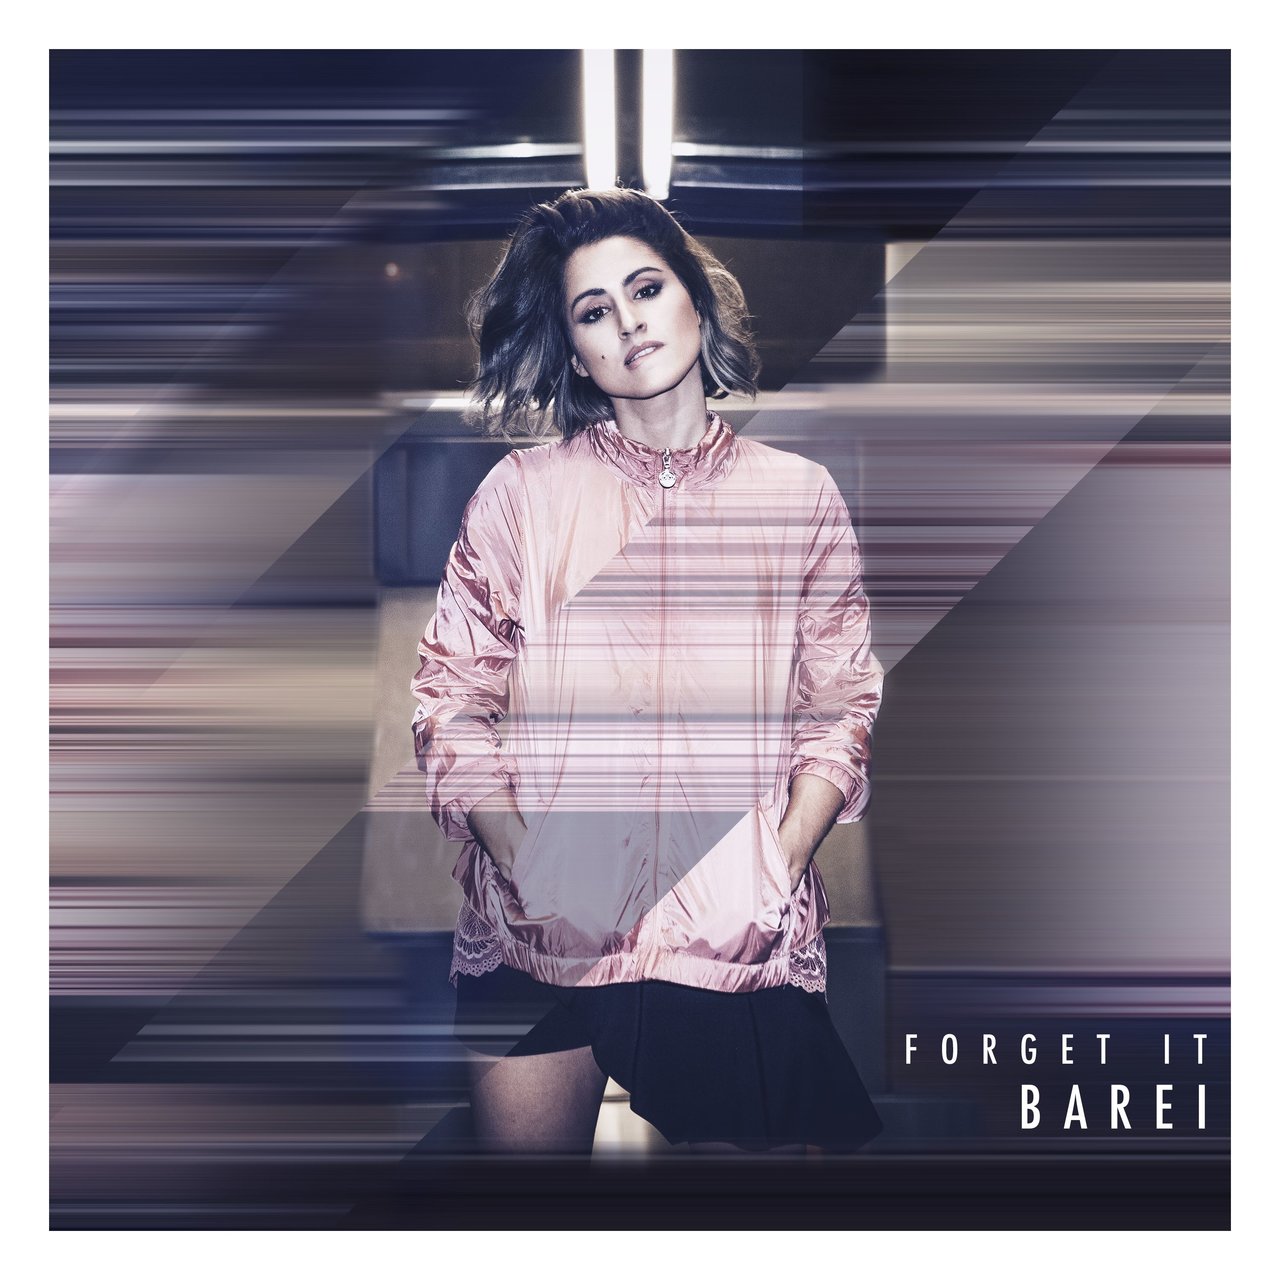 Barei Forget It cover artwork